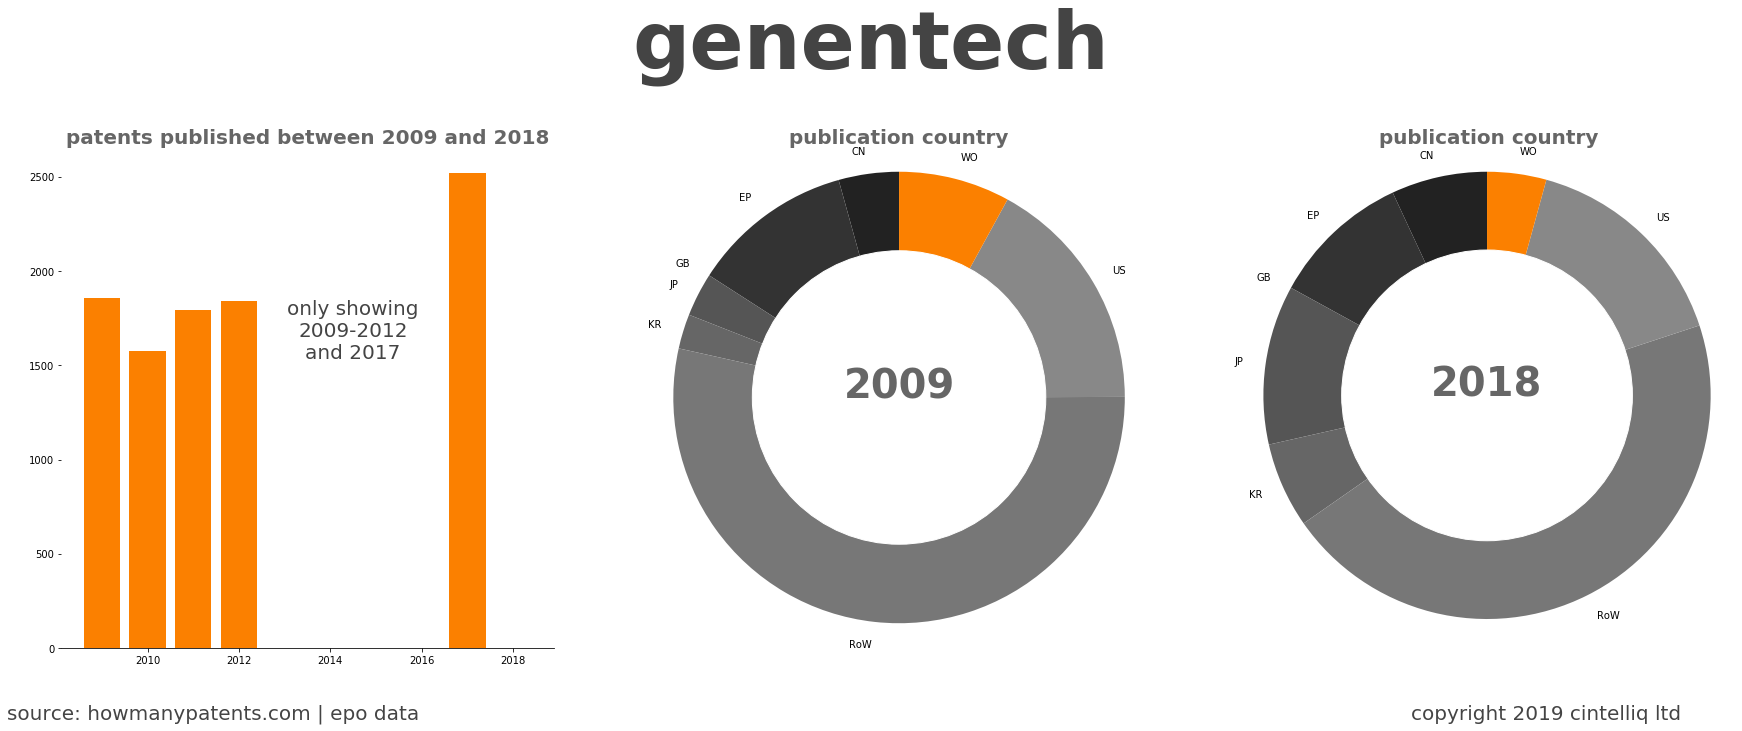 summary of patents for Genentech